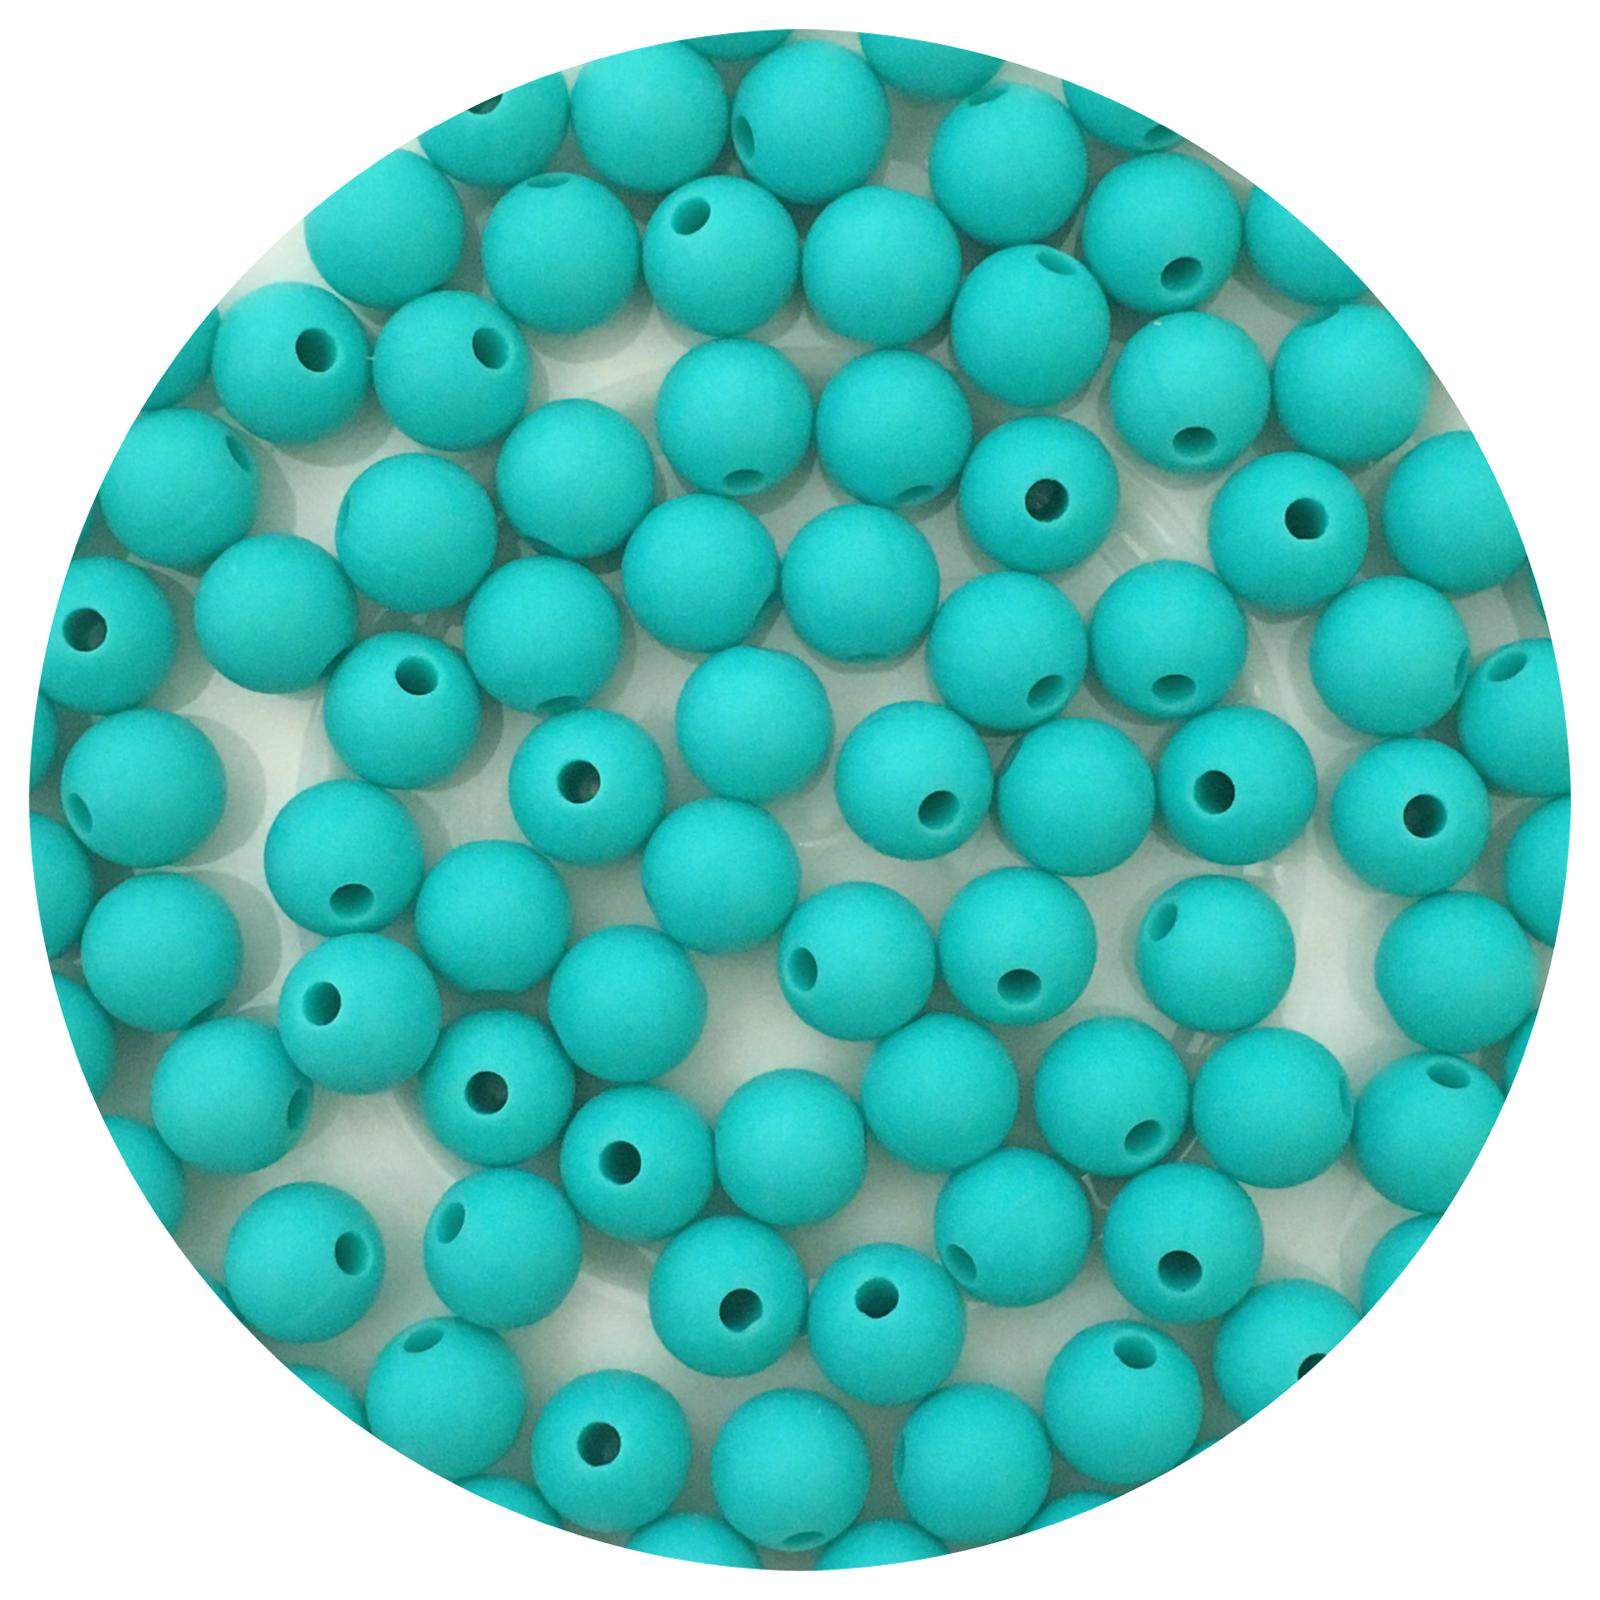 Turquoise - 9mm Round Silicone Beads - 5 Beads